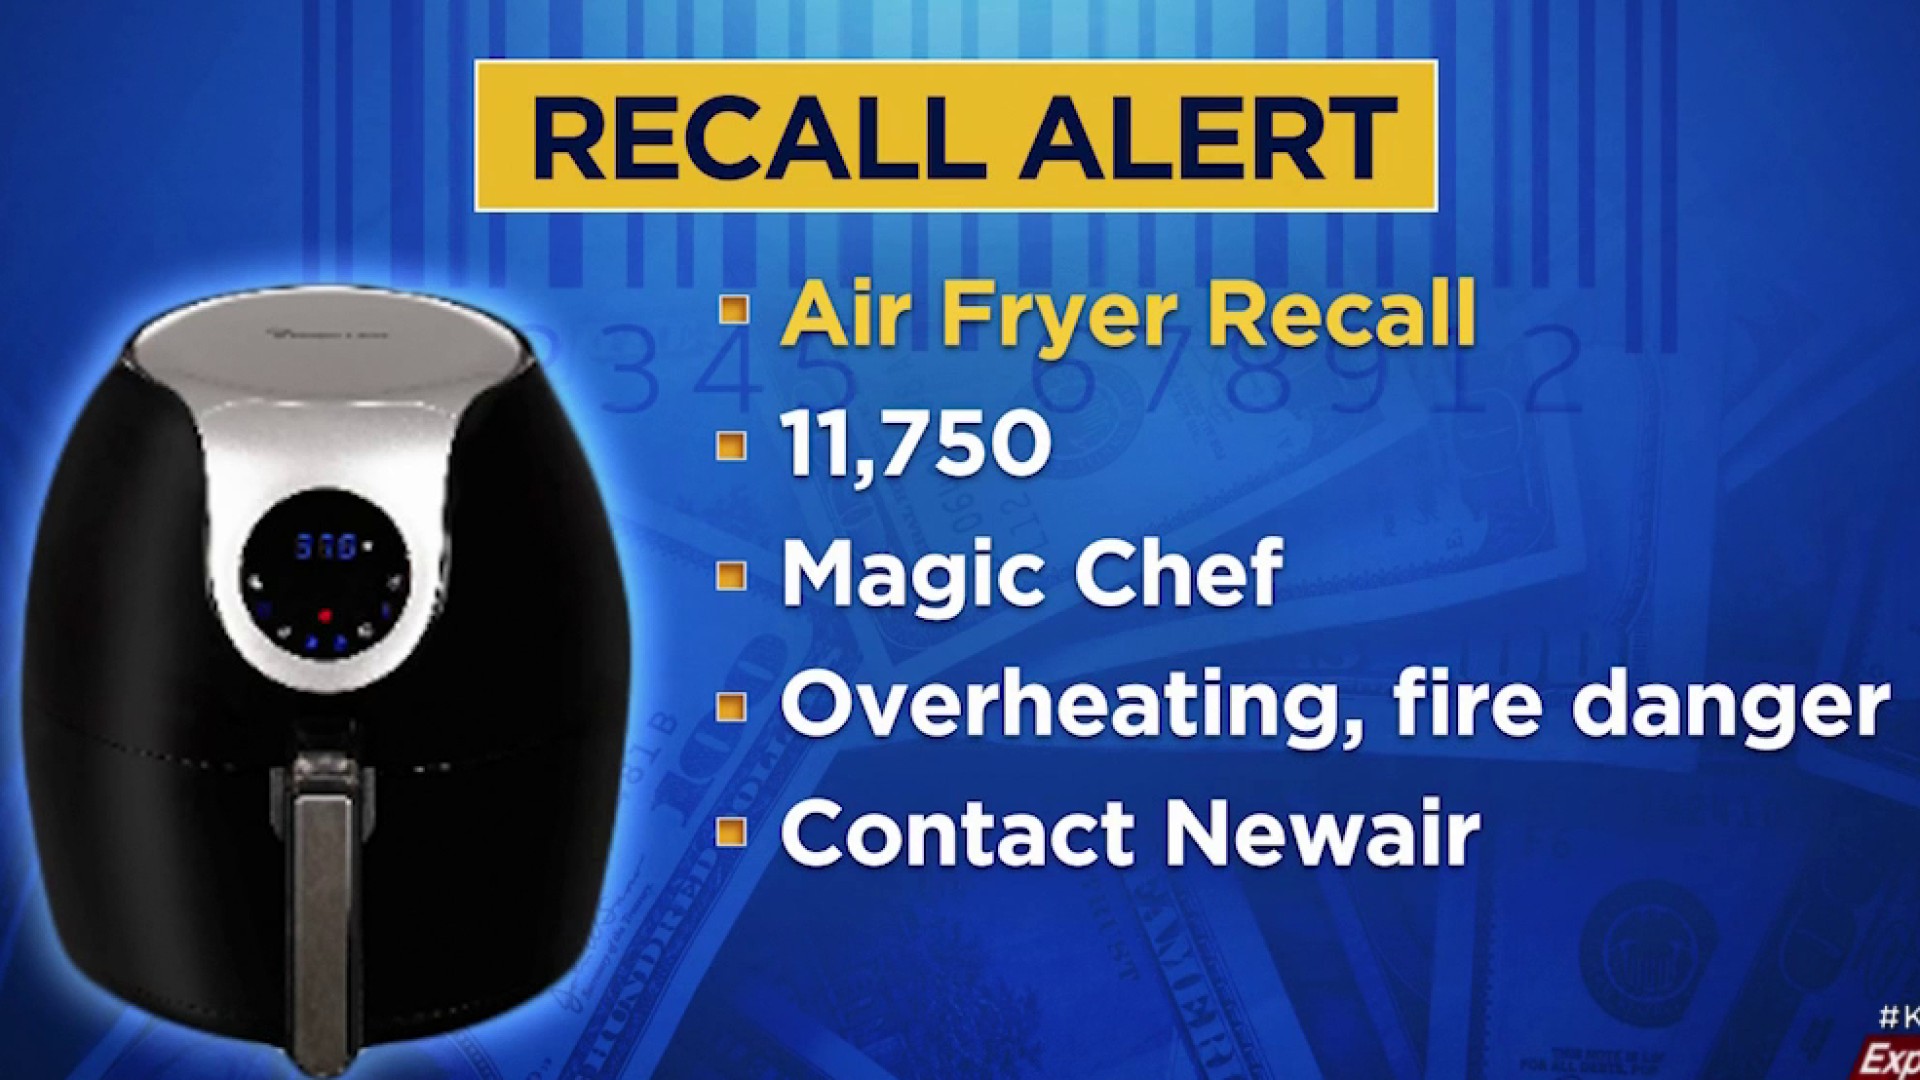 Is Your Air Fryer Safe? 2 Million Recalled Due to Dangerous Overheating -  CNET